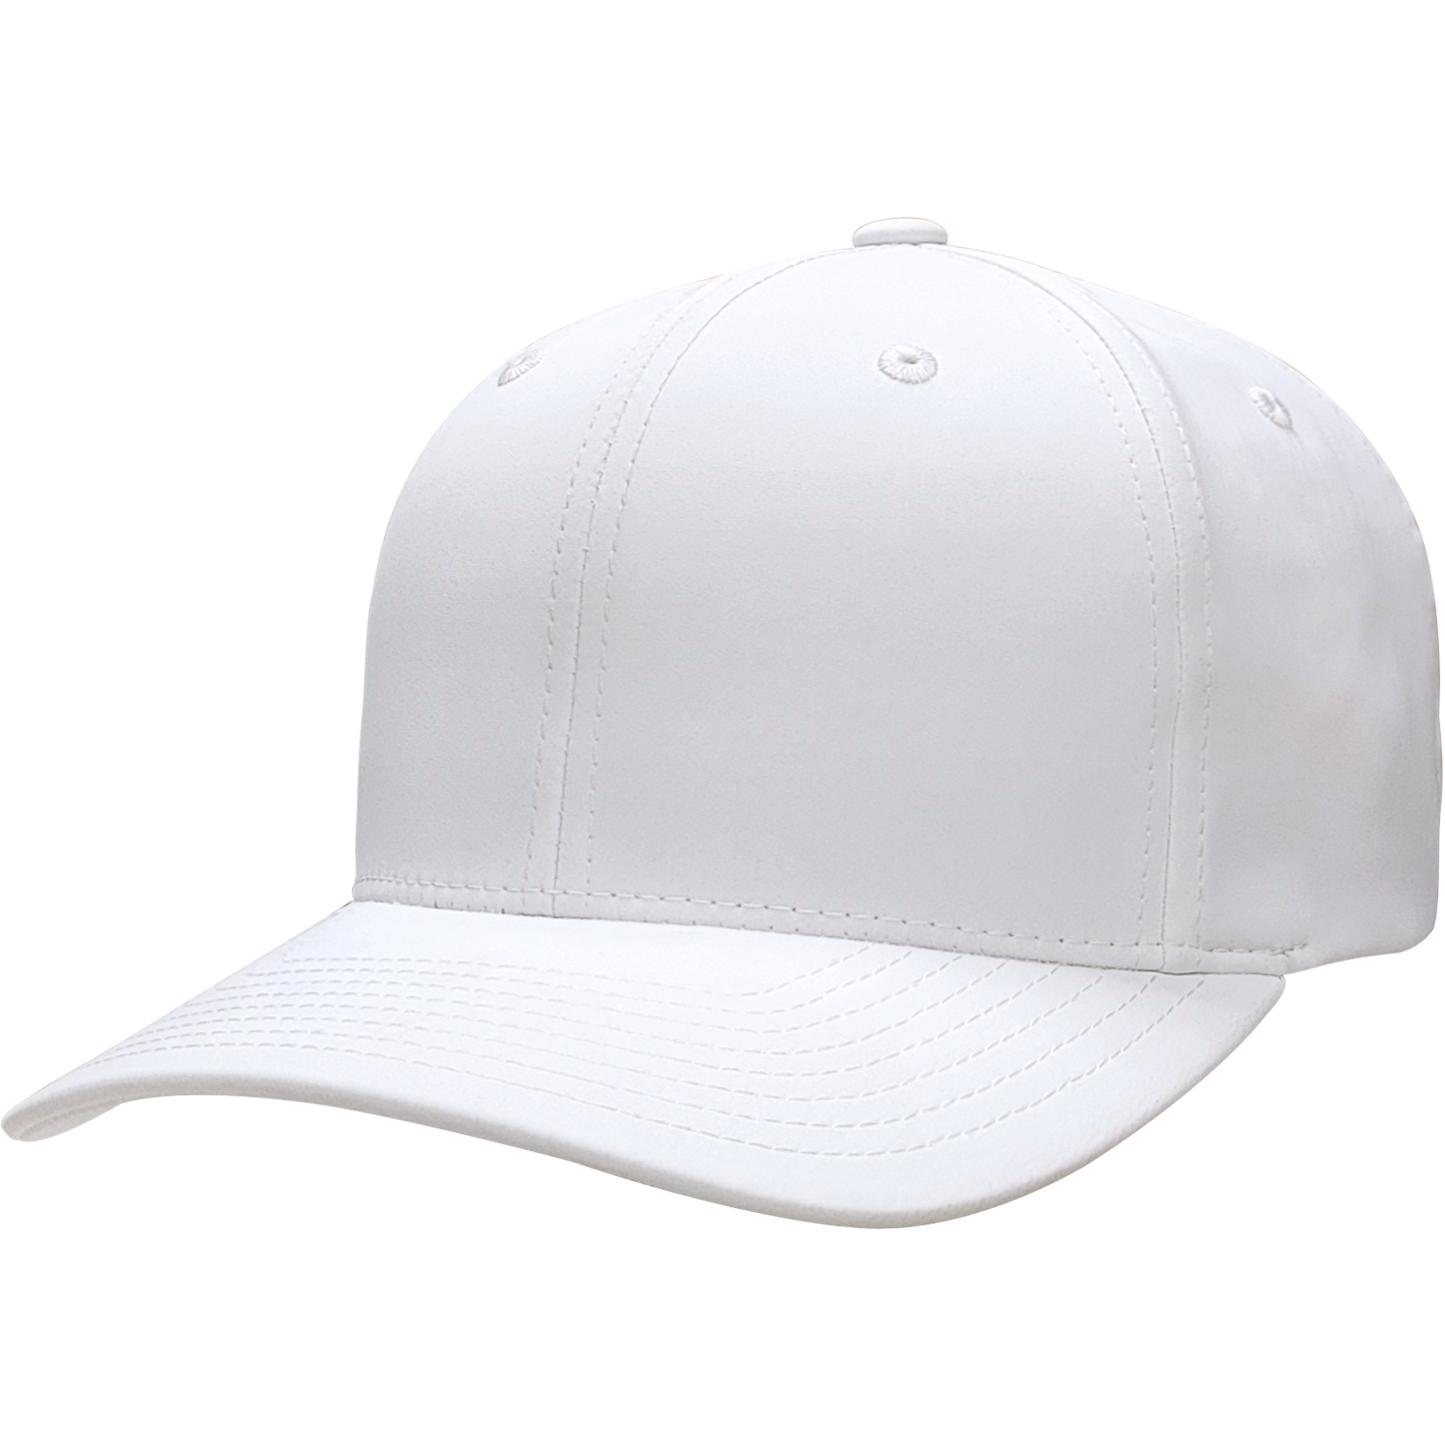 6 Panel Structured - D180